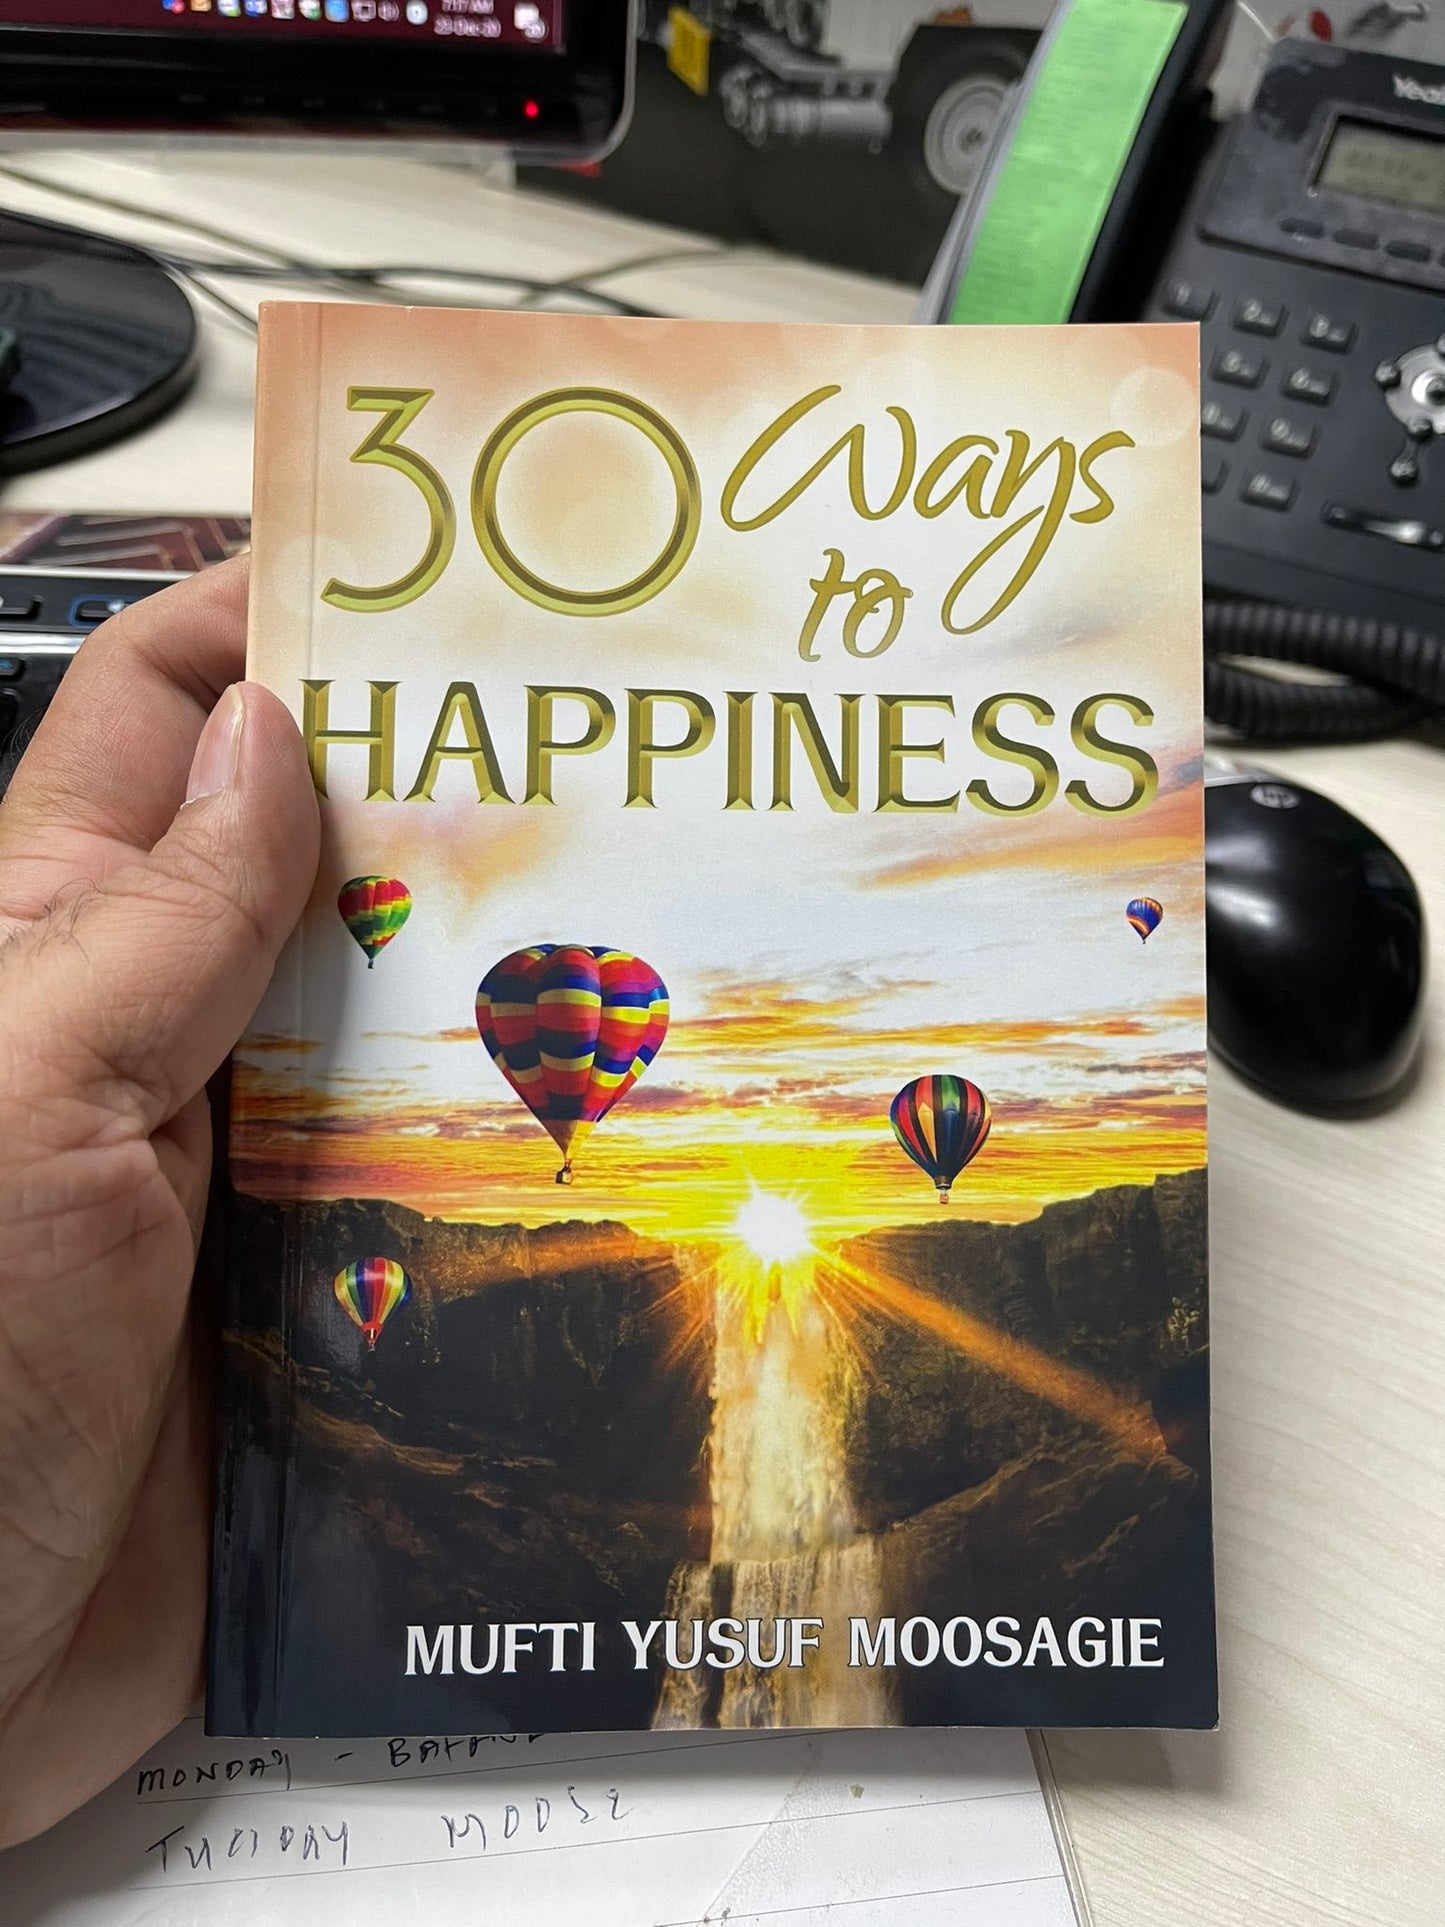 30 Ways to Happiness by Mufti Yusuf Moosagie